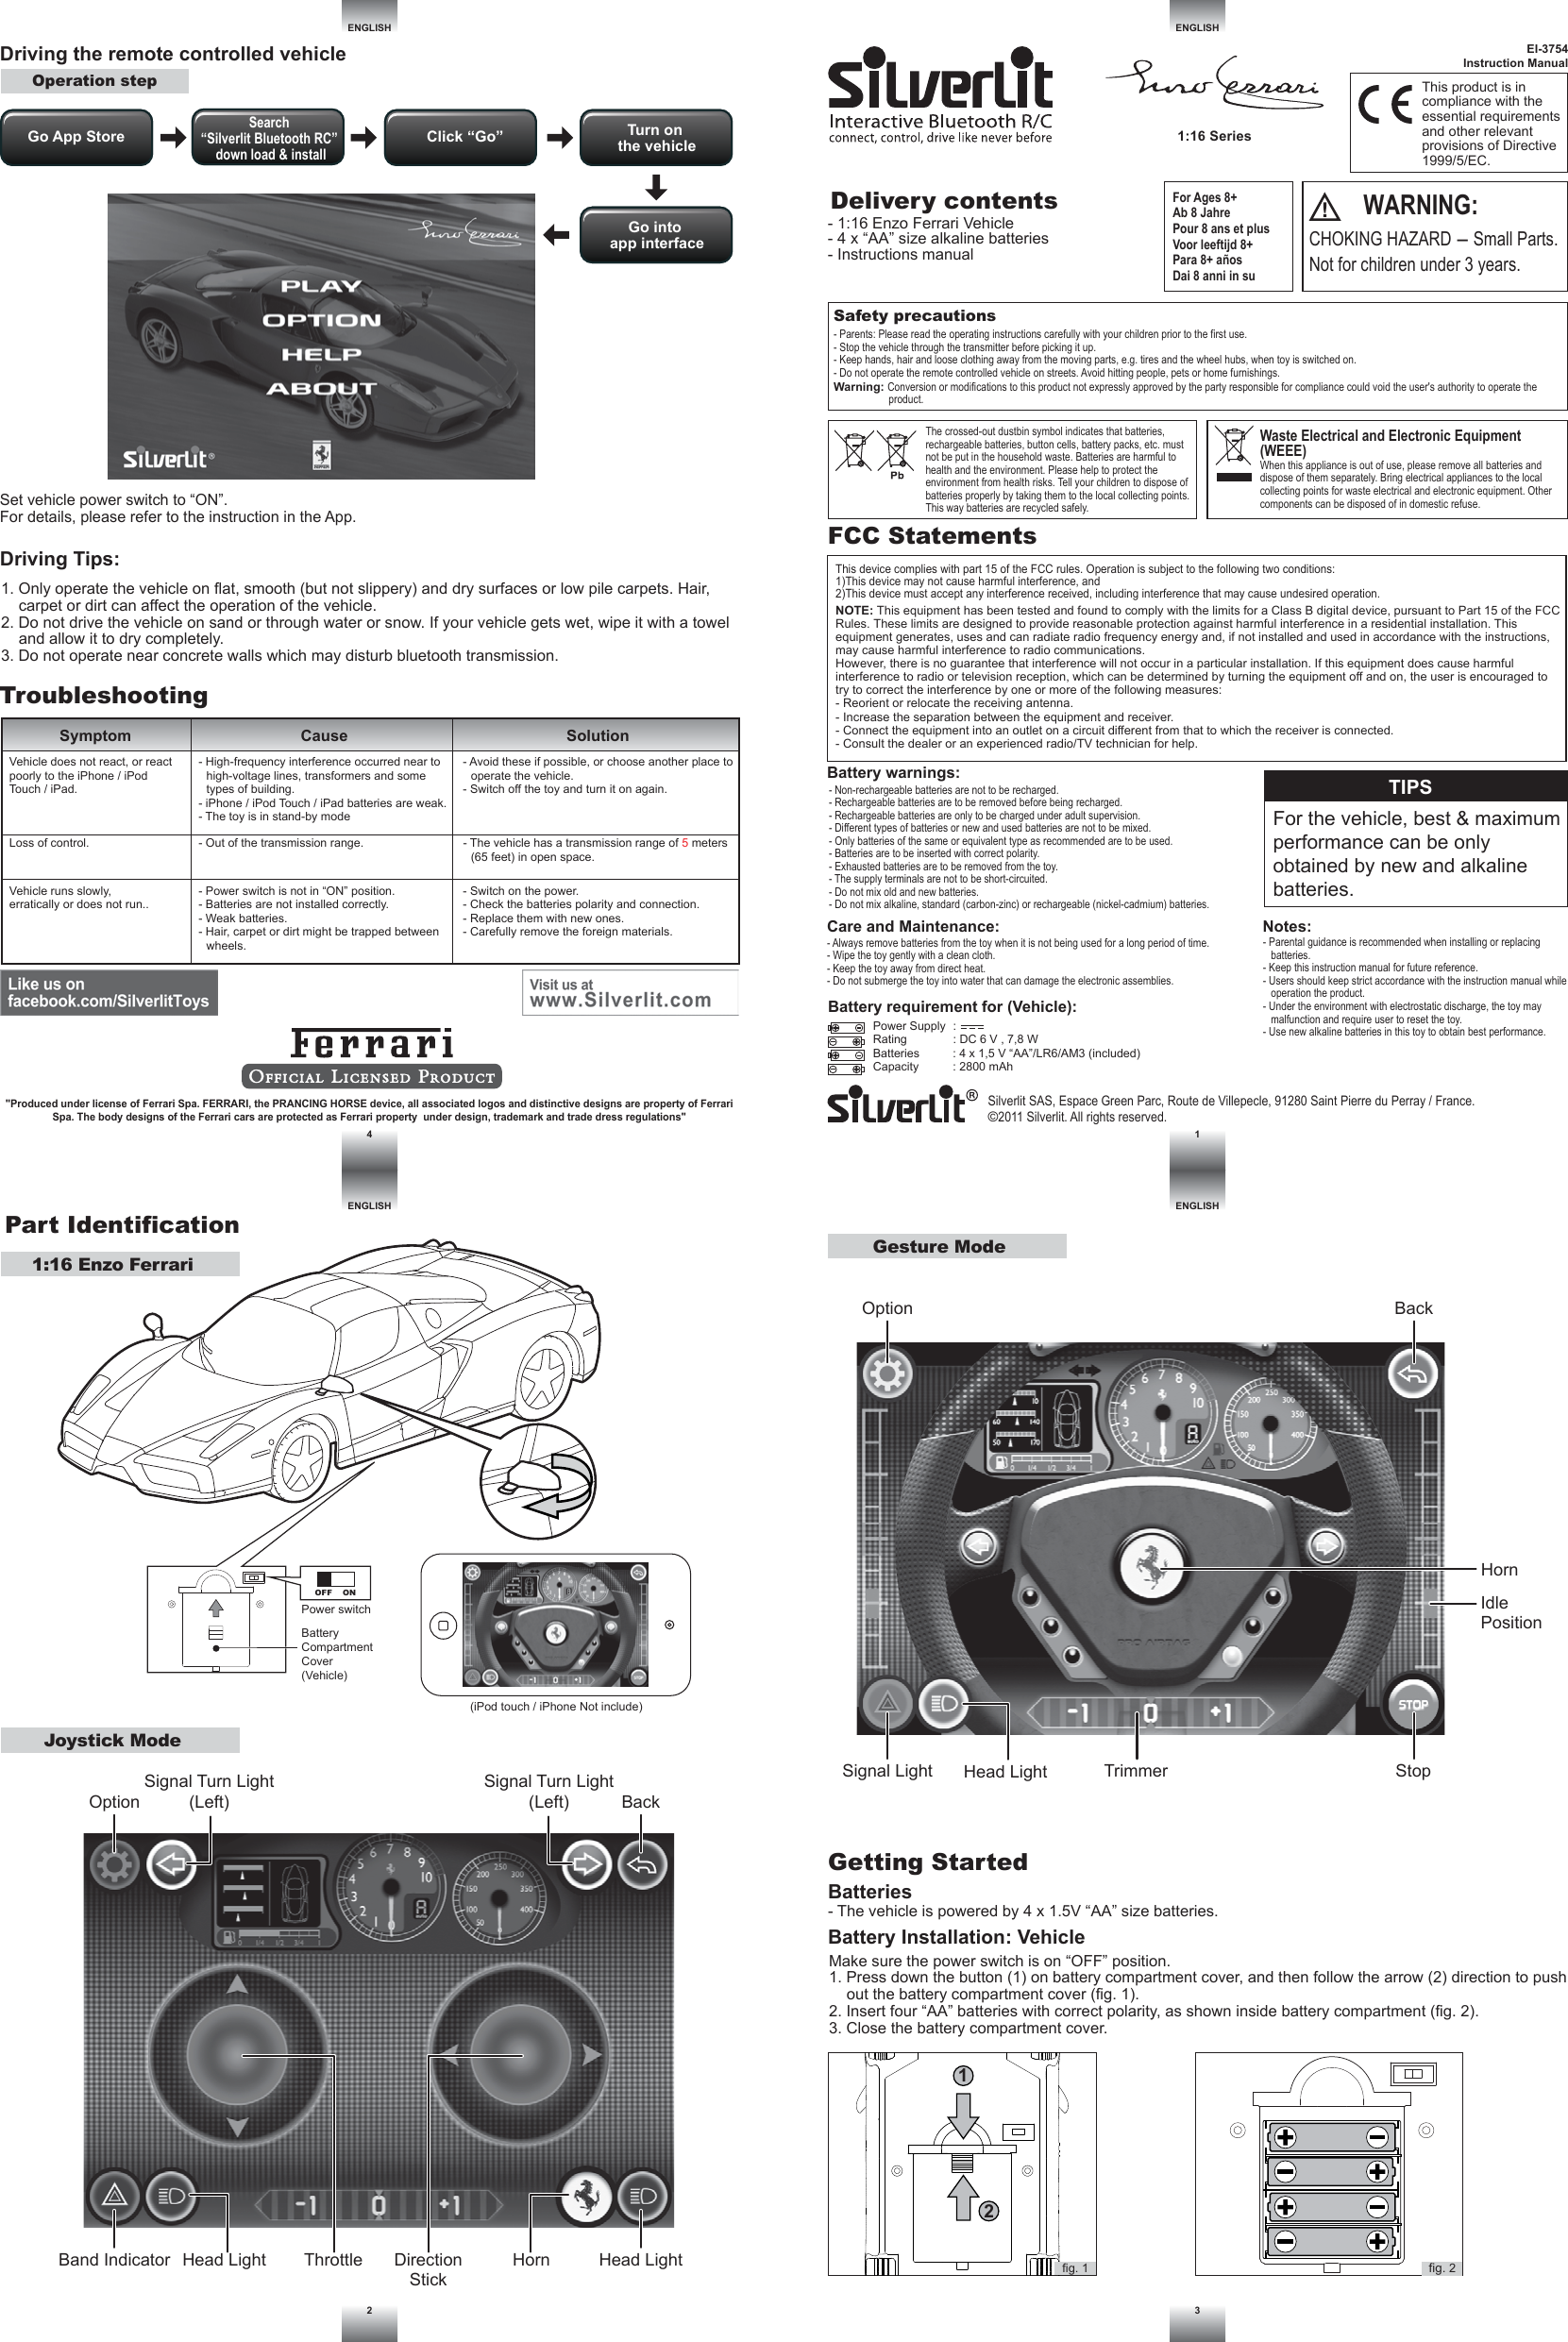 EI-3754Instruction ManualDelivery contentsSilverlit SAS, Espace Green Parc, Route de Villepecle, 91280 Saint Pierre du Perray / France.©2011 Silverlit. All rights reserved.Safety precautions- Parents: Please read the operating instructions carefully with your children prior to the first use.- Stop the vehicle through the transmitter before picking it up.- Keep hands, hair and loose clothing away from the moving parts, e.g. tires and the wheel hubs, when toy is switched on.- Do not operate the remote controlled vehicle on streets. Avoid hitting people, pets or home furnishings.Part IdentificationENGLISHENGLISHENGLISH1ENGLISH42 3ThrottleDriving Tips:TroubleshootingSymptom Cause SolutionDriving the remote controlled vehicleNOTE: This equipment has been tested and found to comply with the limits for a Class B digital device, pursuant to Part 15 of the FCC Rules. These limits are designed to provide reasonable protection against harmful interference in a residential installation. This equipment generates, uses and can radiate radio frequency energy and, if not installed and used in accordance with the instructions, may cause harmful interference to radio communications.However, there is no guarantee that interference will not occur in a particular installation. If this equipment does cause harmful interference to radio or television reception, which can be determined by turning the equipment off and on, the user is encouraged to try to correct the interference by one or more of the following measures:- Reorient or relocate the receiving antenna.- Increase the separation between the equipment and receiver.- Connect the equipment into an outlet on a circuit different from that to which the receiver is connected.- Consult the dealer or an experienced radio/TV technician for help.This device complies with part 15 of the FCC rules. Operation is subject to the following two conditions:1)This device may not cause harmful interference, and2)This device must accept any interference received, including interference that may cause undesired operation.FCC StatementsBattery requirement for (Vehicle):Power Supply  :  Rating              : DC 6 V , 7,8 WBatteries          : 4 x 1,5 V “AA”/LR6/AM3 (included)Capacity          : 2800 mAhSet vehicle power switch to “ON”.For details, please refer to the instruction in the App.Notes:- Parental guidance is recommended when installing or replacing batteries.- Keep this instruction manual for future reference.- Users should keep strict accordance with the instruction manual while operation the product.- Under the environment with electrostatic discharge, the toy may malfunction and require user to reset the toy.- Use new alkaline batteries in this toy to obtain best performance.Care and Maintenance:- Always remove batteries from the toy when it is not being used for a long period of time.- Wipe the toy gently with a clean cloth.- Keep the toy away from direct heat.- Do not submerge the toy into water that can damage the electronic assemblies.Warning: Conversion or modifications to this product not expressly approved by the party responsible for compliance could void the user&apos;s authority to operate the product.Battery warnings:- Non-rechargeable batteries are not to be recharged.- Rechargeable batteries are to be removed before being recharged.- Rechargeable batteries are only to be charged under adult supervision.- Different types of batteries or new and used batteries are not to be mixed.- Only batteries of the same or equivalent type as recommended are to be used.- Batteries are to be inserted with correct polarity.- Exhausted batteries are to be removed from the toy.- The supply terminals are not to be short-circuited.- Do not mix old and new batteries.- Do not mix alkaline, standard (carbon-zinc) or rechargeable (nickel-cadmium) batteries.WARNING:CHOKING HAZARD - Small Parts. Not for children under 3 years.The crossed-out dustbin symbol indicates that batteries, rechargeable batteries, button cells, battery packs, etc. must not be put in the household waste. Batteries are harmful to health and the environment. Please help to protect the environment from health risks. Tell your children to dispose of batteries properly by taking them to the local collecting points. This way batteries are recycled safely.Waste Electrical and Electronic Equipment (WEEE)When this appliance is out of use, please remove all batteries and dispose of them separately. Bring electrical appliances to the local collecting points for waste electrical and electronic equipment. Other components can be disposed of in domestic refuse.For Ages 8+Ab 8 JahrePour 8 ans et plusVoor leeftijd 8+Para 8+ añosDai 8 anni in suThis product is in compliance with the essential requirements and other relevant provisions of Directive 1999/5/EC.1. Only operate the vehicle on flat, smooth (but not slippery) and dry surfaces or low pile carpets. Hair, carpet or dirt can affect the operation of the vehicle.2. Do not drive the vehicle on sand or through water or snow. If your vehicle gets wet, wipe it with a towel and allow it to dry completely.3. Do not operate near concrete walls which may disturb bluetooth transmission.- The vehicle has a transmission range of 5 meters (65 feet) in open space.- Avoid these if possible, or choose another place to operate the vehicle.- Switch off the toy and turn it on again.- Power switch is not in “ON” position.- Batteries are not installed correctly.- Weak batteries.- Hair, carpet or dirt might be trapped between wheels.- Out of the transmission range.- High-frequency interference occurred near to high-voltage lines, transformers and some types of building.- iPhone / iPod Touch / iPad batteries are weak.- The toy is in stand-by mode- Switch on the power.- Check the batteries polarity and connection.- Replace them with new ones.- Carefully remove the foreign materials.Vehicle runs slowly,erratically or does not run..Vehicle does not react, or react poorly to the iPhone / iPod Touch / iPad.Loss of control.Batteries- The vehicle is powered by 4 x 1.5V “AA” size batteries.Battery Installation: VehicleGetting StartedMake sure the power switch is on “OFF” position.1. Press down the button (1) on battery compartment cover, and then follow the arrow (2) direction to push out the battery compartment cover (fig. 1).2. Insert four “AA” batteries with correct polarity, as shown inside battery compartment (fig. 2).3. Close the battery compartment cover.TIPSFor the vehicle, best &amp; maximum performance can be only obtained by new and alkaline batteries.- 1:16 Enzo Ferrari Vehicle- 4 x “AA” size alkaline batteries- Instructions manual1:16 Enzo FerrariOperation step&quot;Produced under license of Ferrari Spa. FERRARI, the PRANCING HORSE device, all associated logos and distinctive designs are property of Ferrari Spa. The body designs of the Ferrari cars are protected as Ferrari property  under design, trademark and trade dress regulations&quot;fig. 212fig. 1Power switchBattery Compartment Cover (Vehicle)OFF    ONJoystick ModeGesture ModeBackHead LightHead LightSignal Light StopTrimmerBand IndicatorOptionSignal Turn Light(Left)Signal Turn Light(Left)BackIdlePositionHornOptionHead Light HornDirectionStick(iPod touch / iPhone Not include)Go App Store Click “Go”Search “Silverlit Bluetooth RC” down load &amp; installTurn on the vehicleGo into app interface1:16 Series